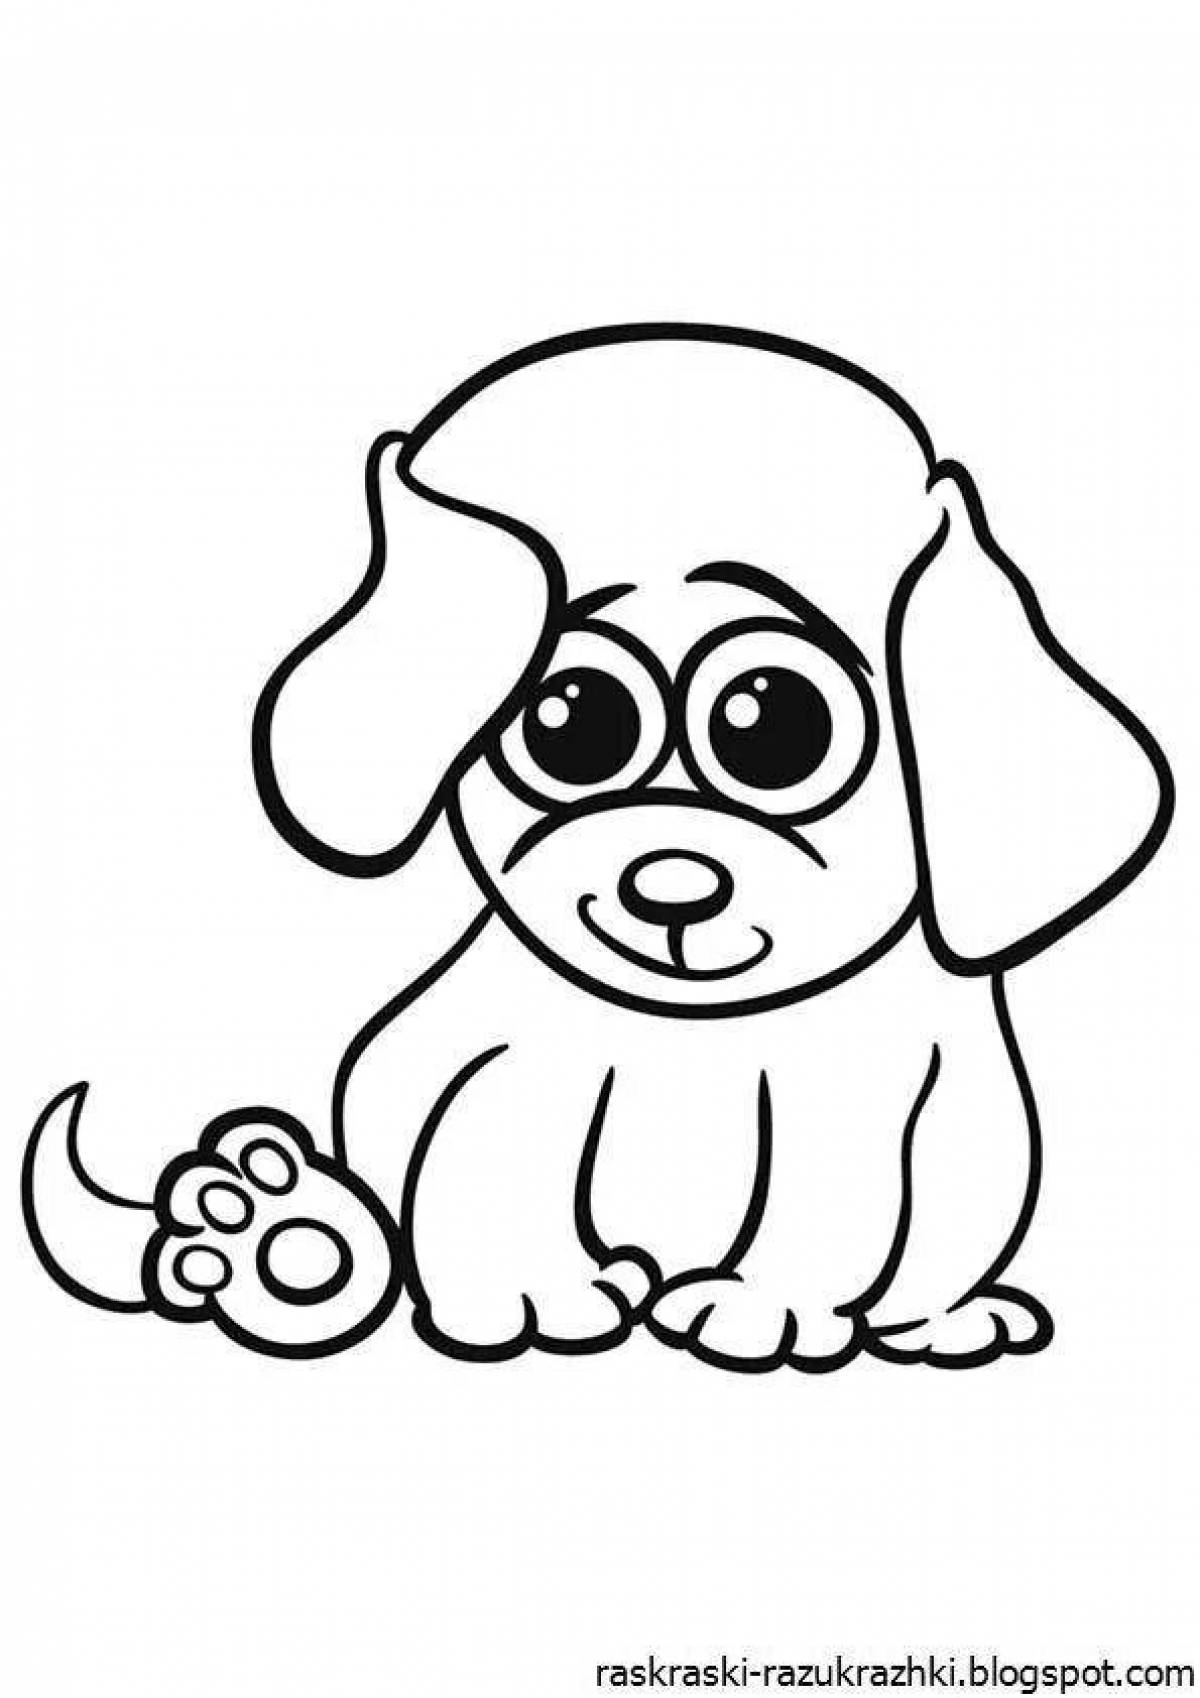 Tiny puppy coloring book